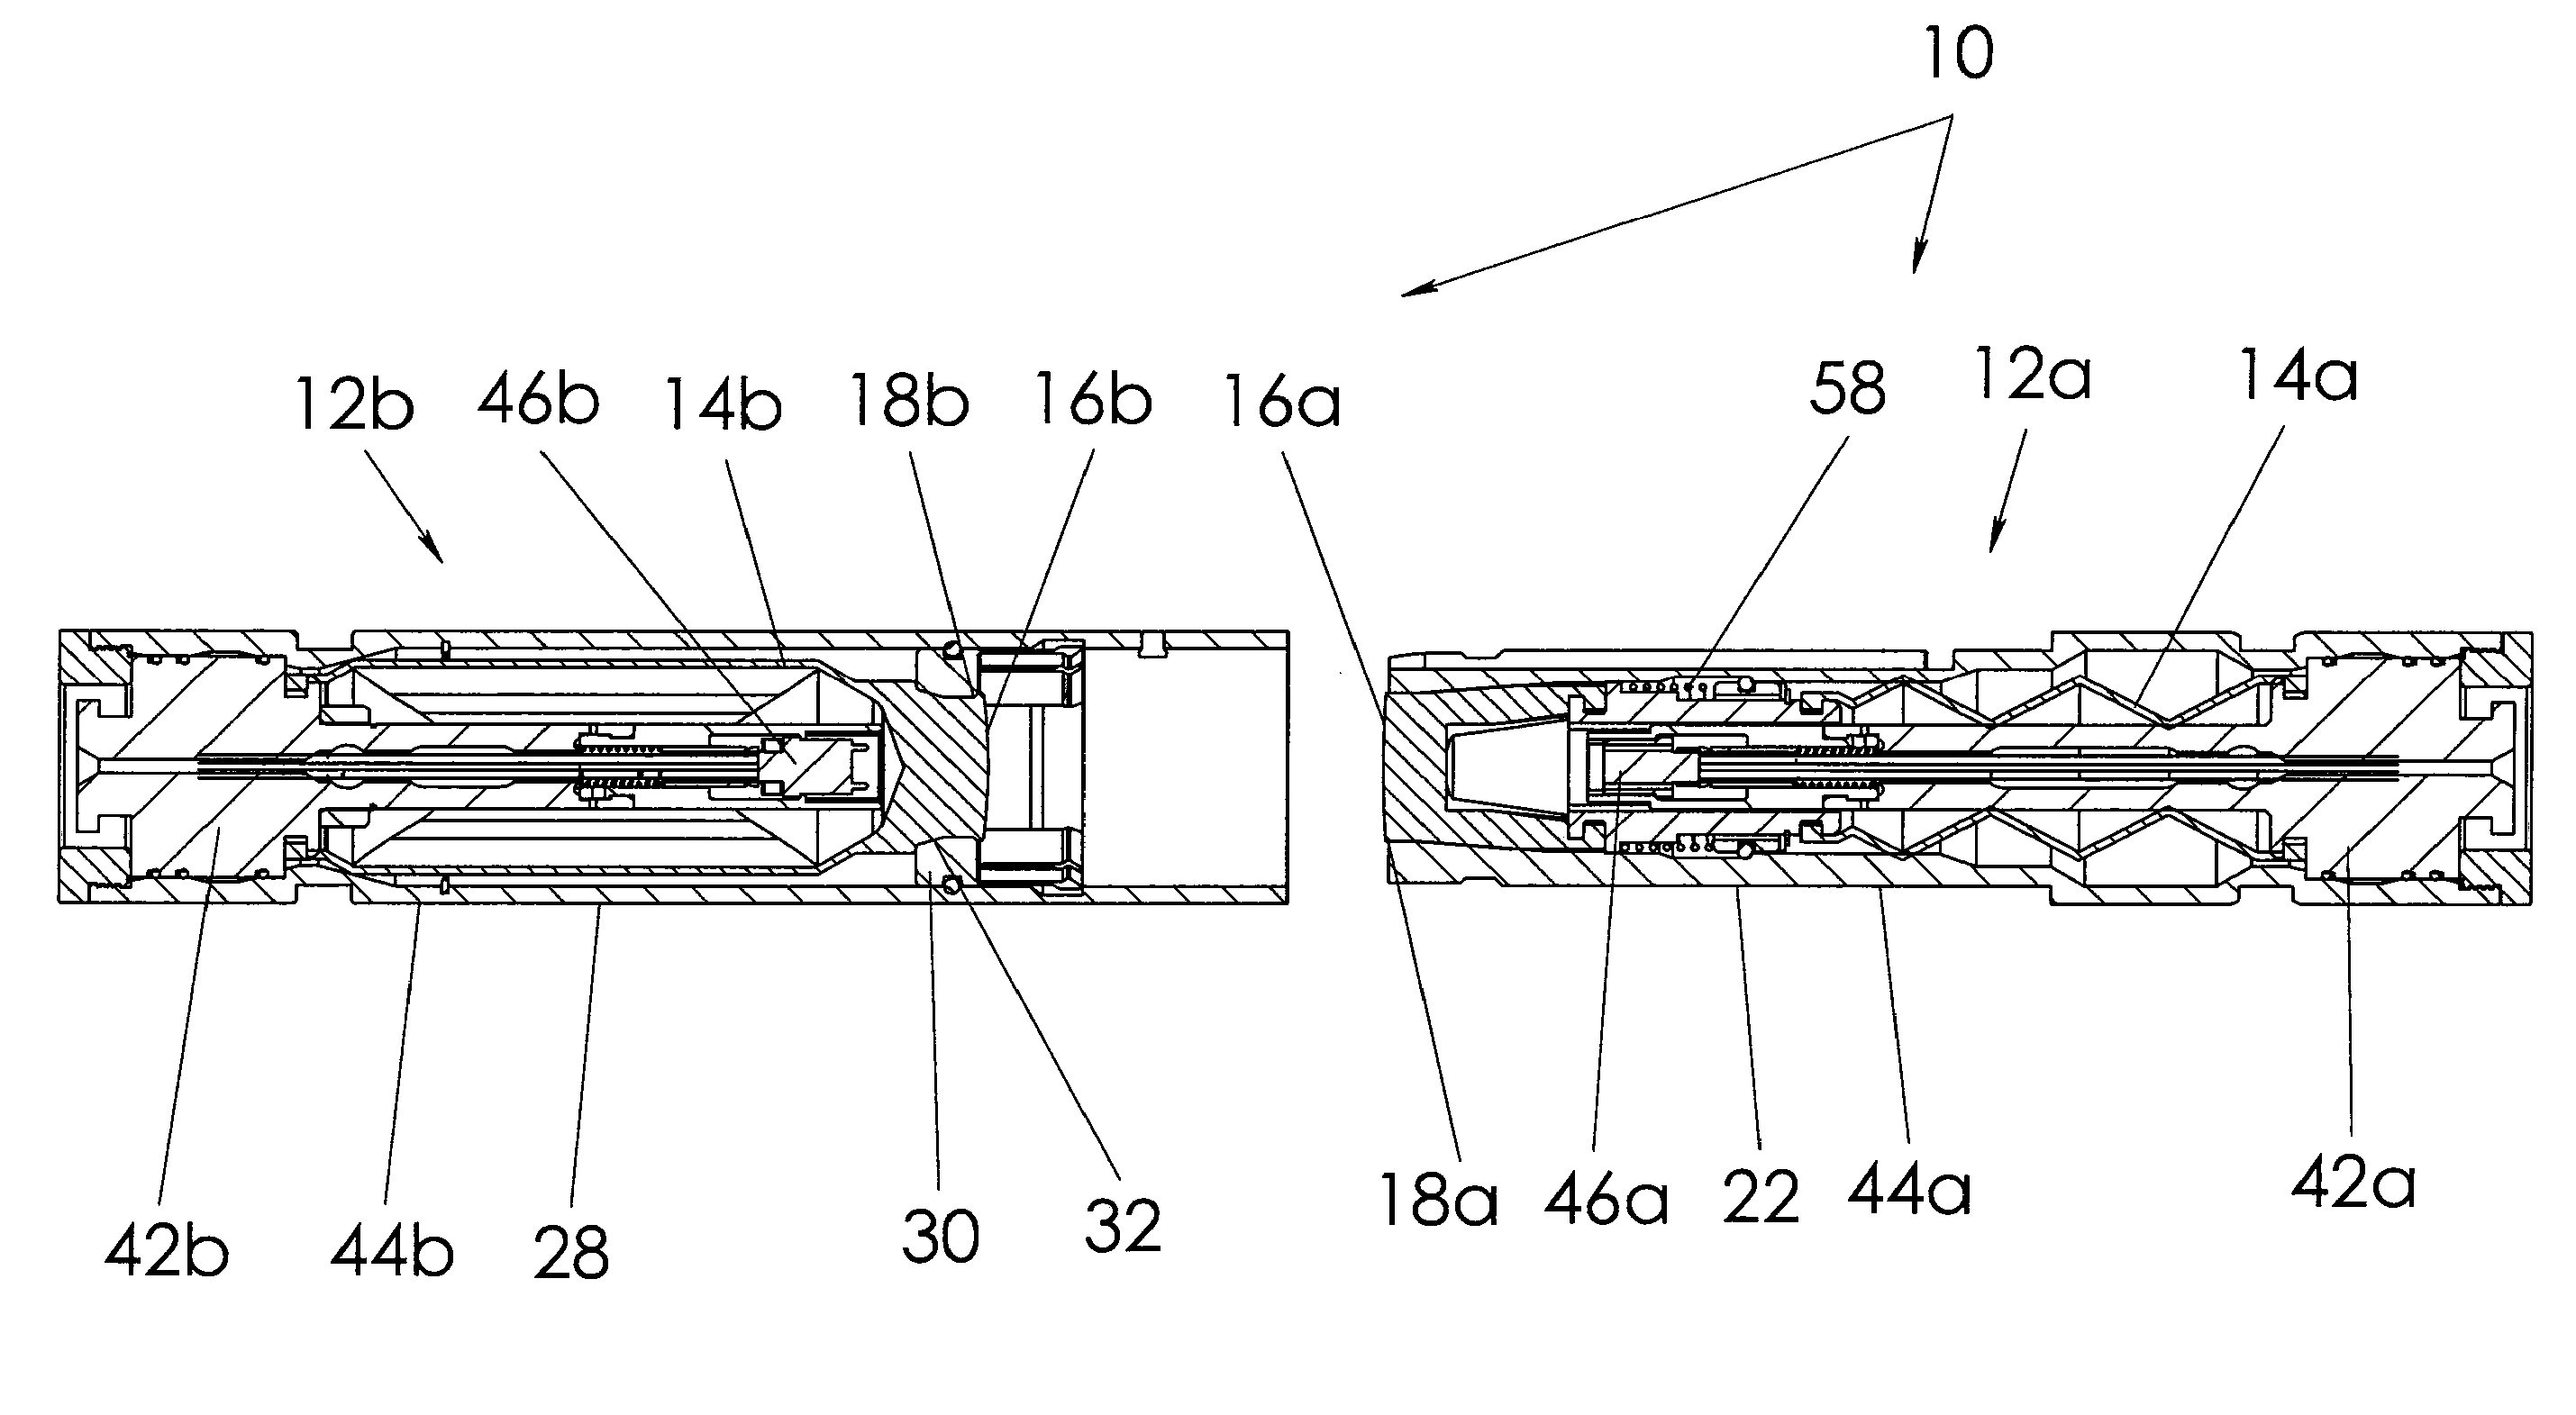 Connector including circular bladder constriction and associated methods